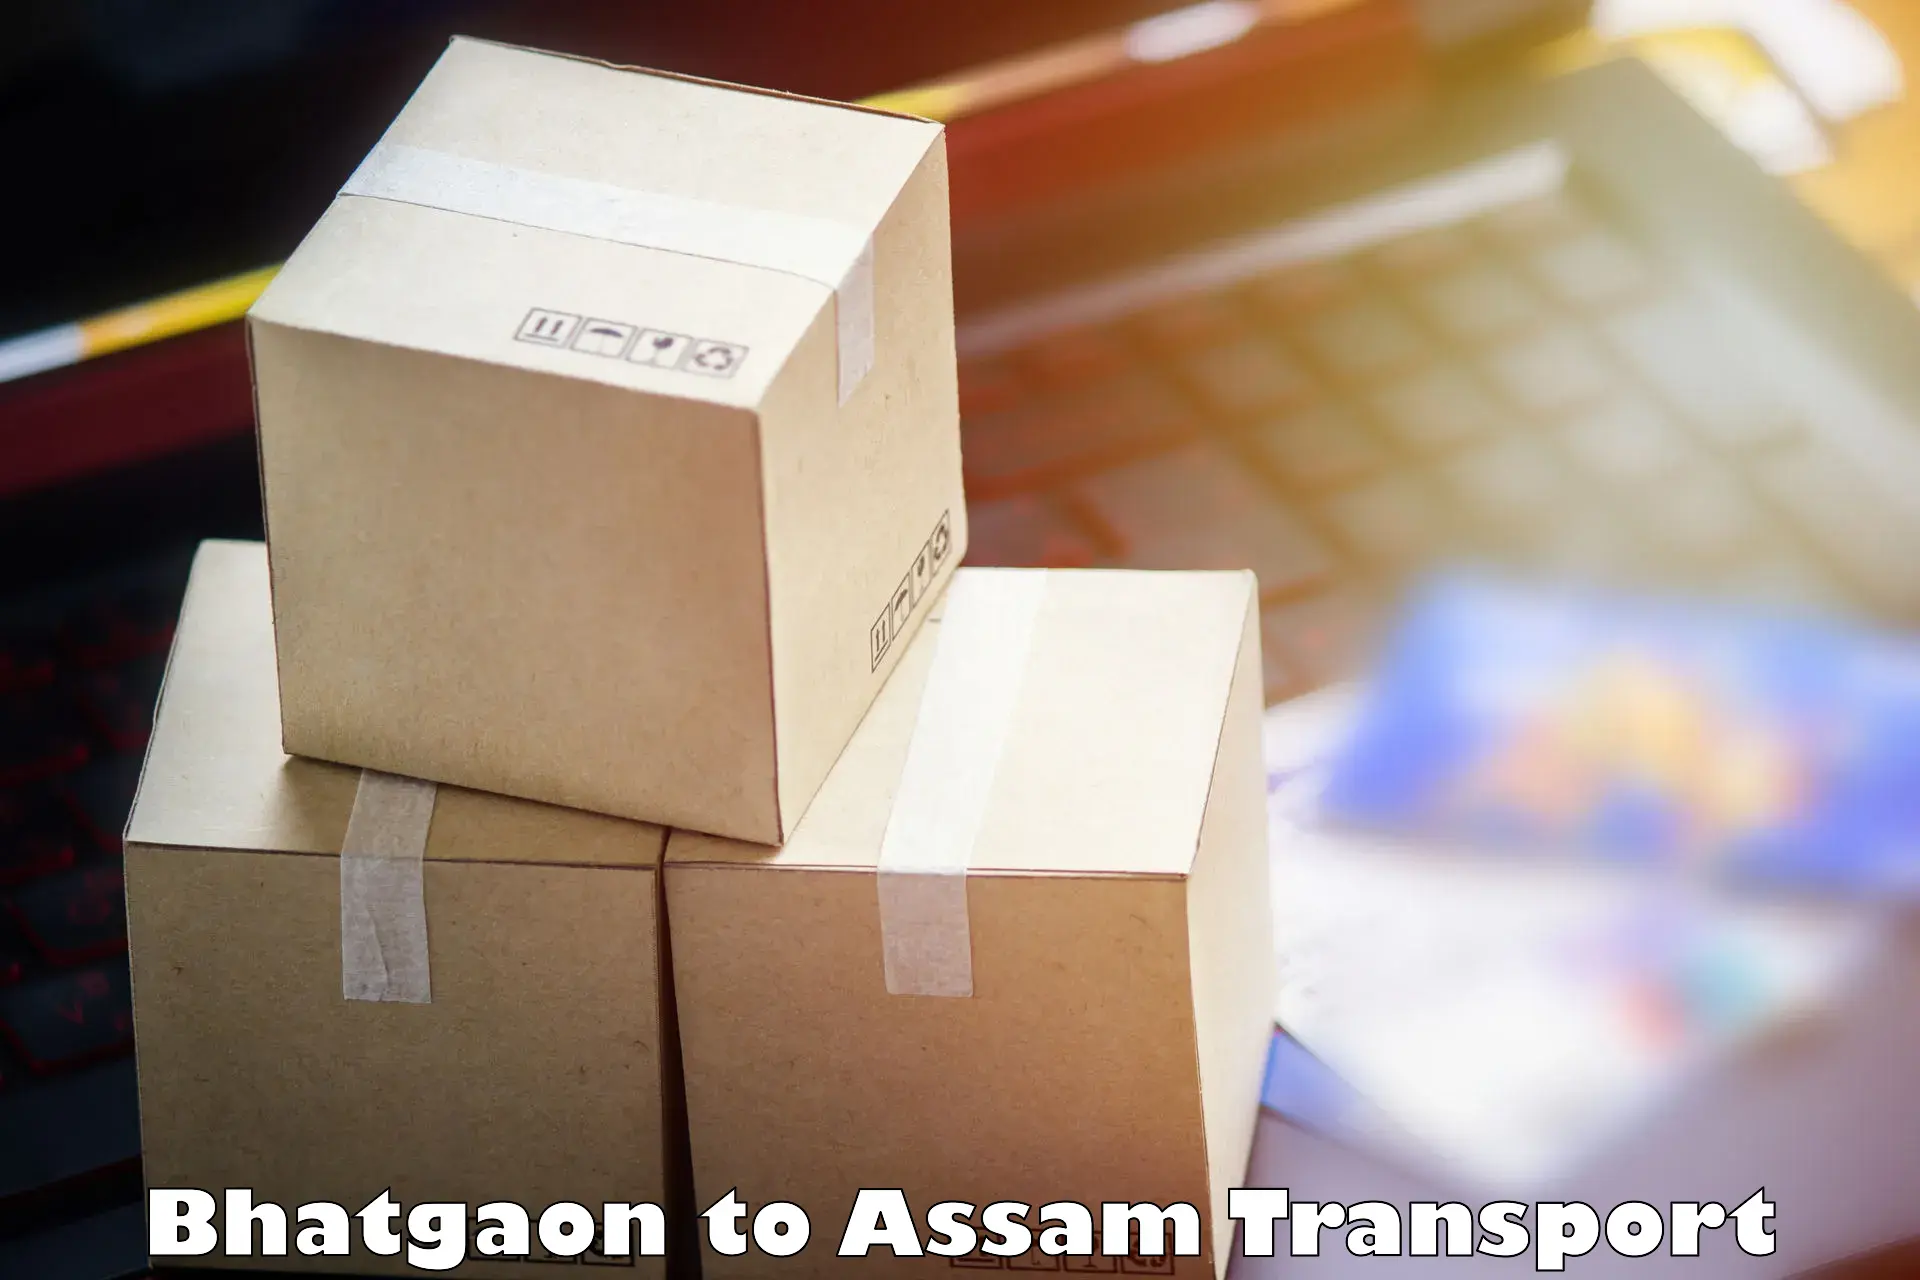 Air freight transport services Bhatgaon to Digboi